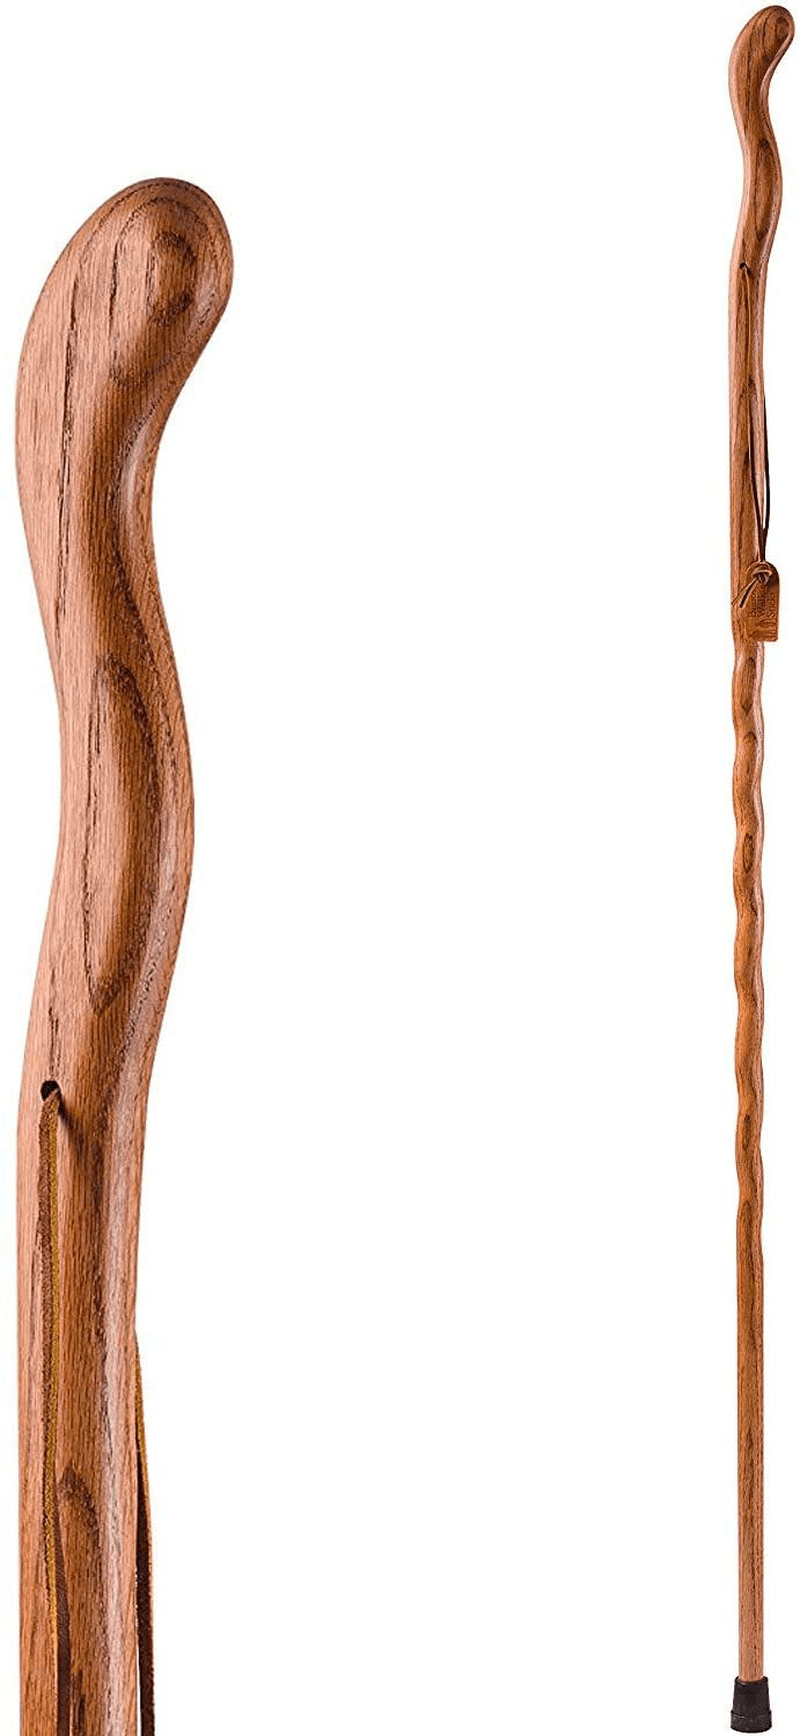 Brazos Trekking Pole Hiking Stick for Men and Women Handcrafted of Lightweight Wood and Made in the USA, Tan Oak, 48 Inches (602-3000-1089)